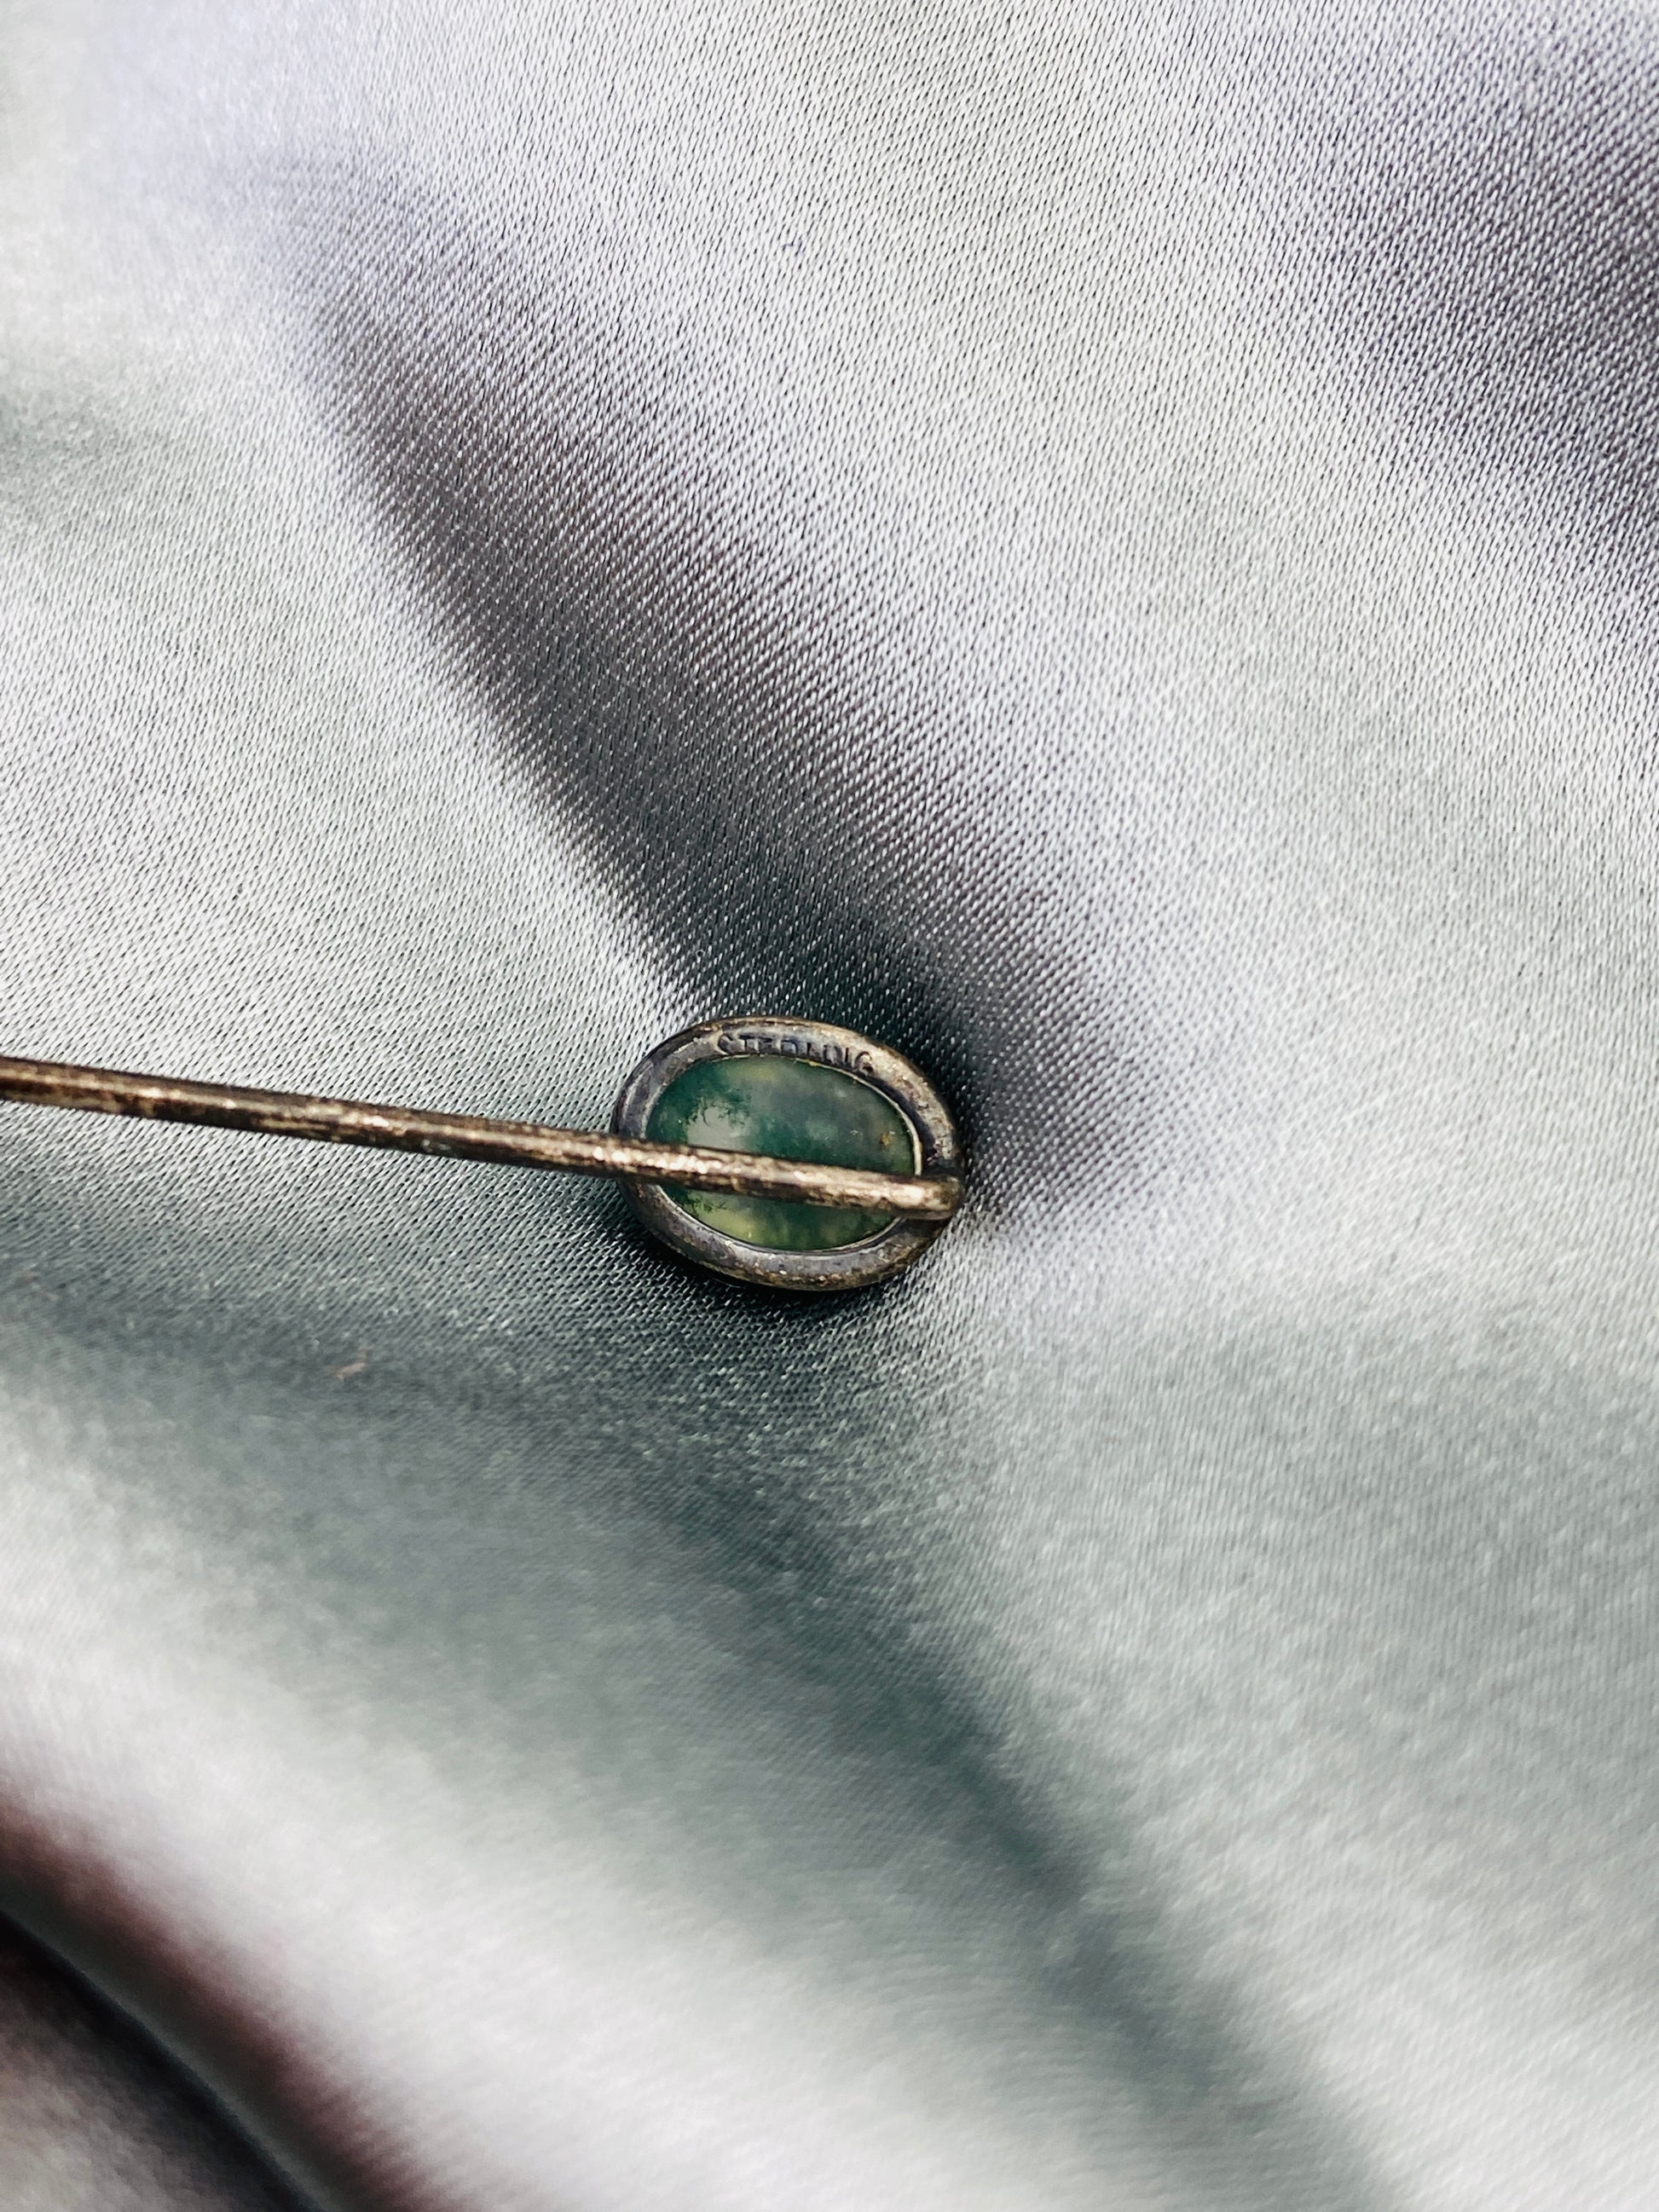 Antique 1910s Small Oval Clear Green-Speckled Glass Hat Pin